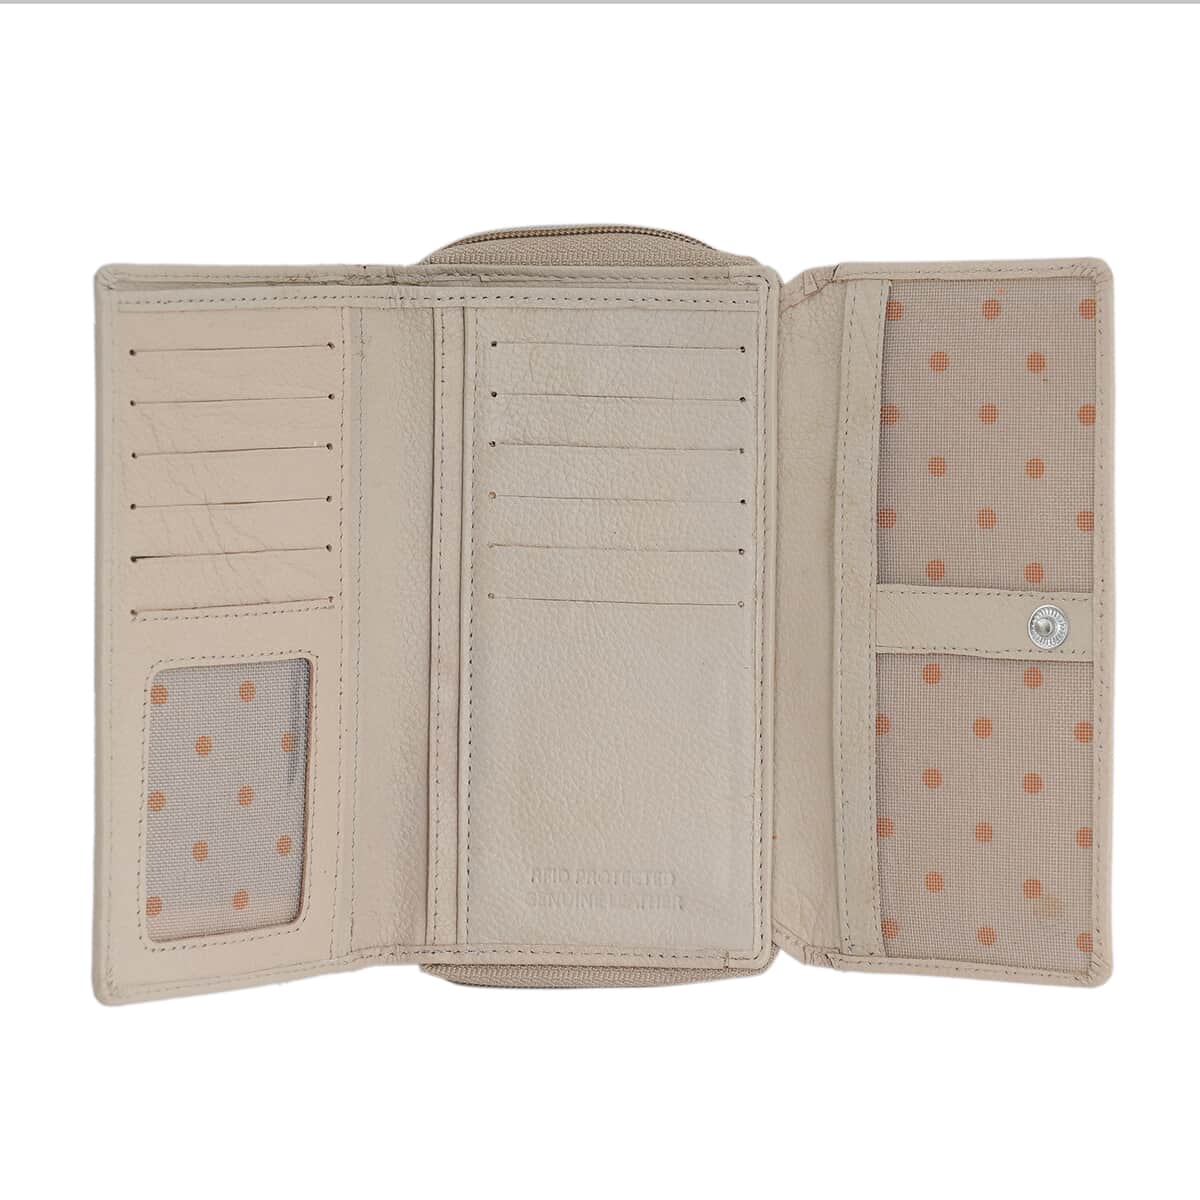 Presidential Deal Union Code Soft Beige Genuine Leather RFID Women's Wallet (7.67"x1.18"x4.13") image number 6